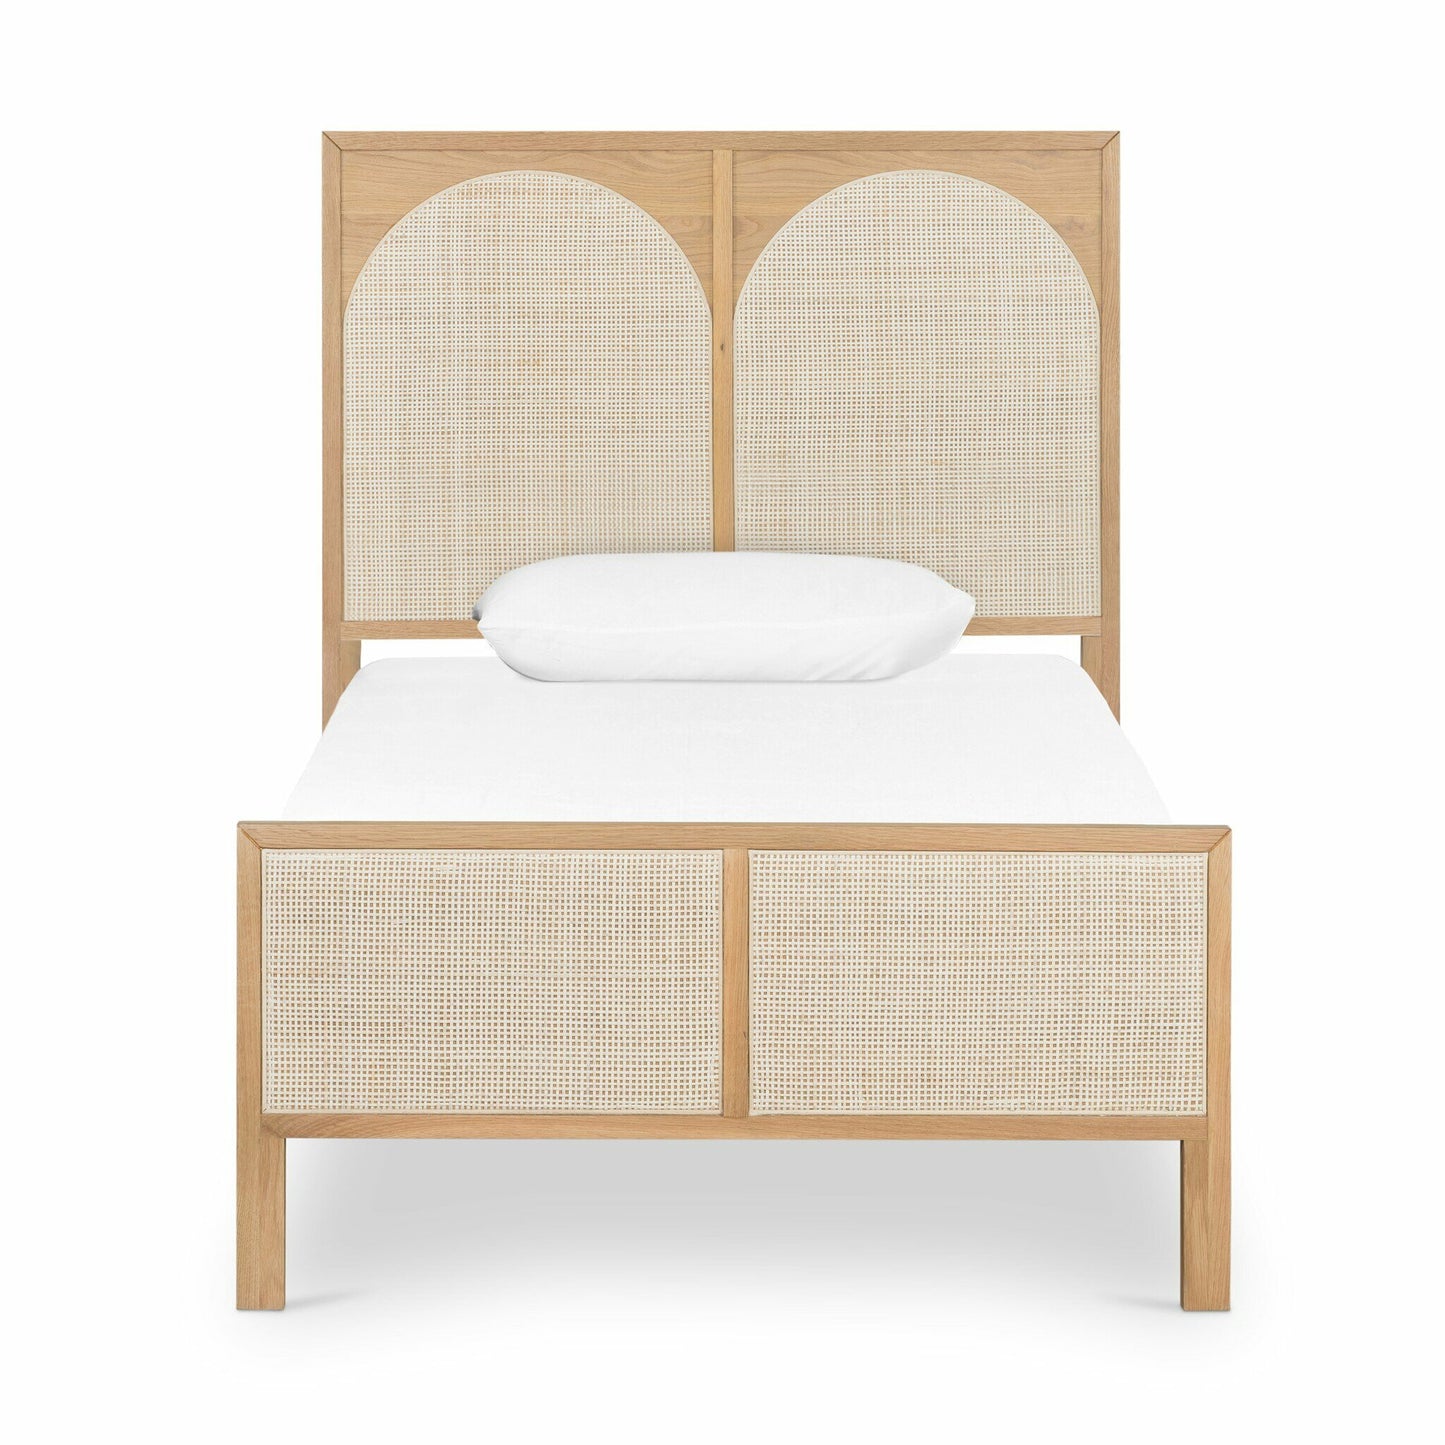 Zaltana Twin Bed Front View woven arches